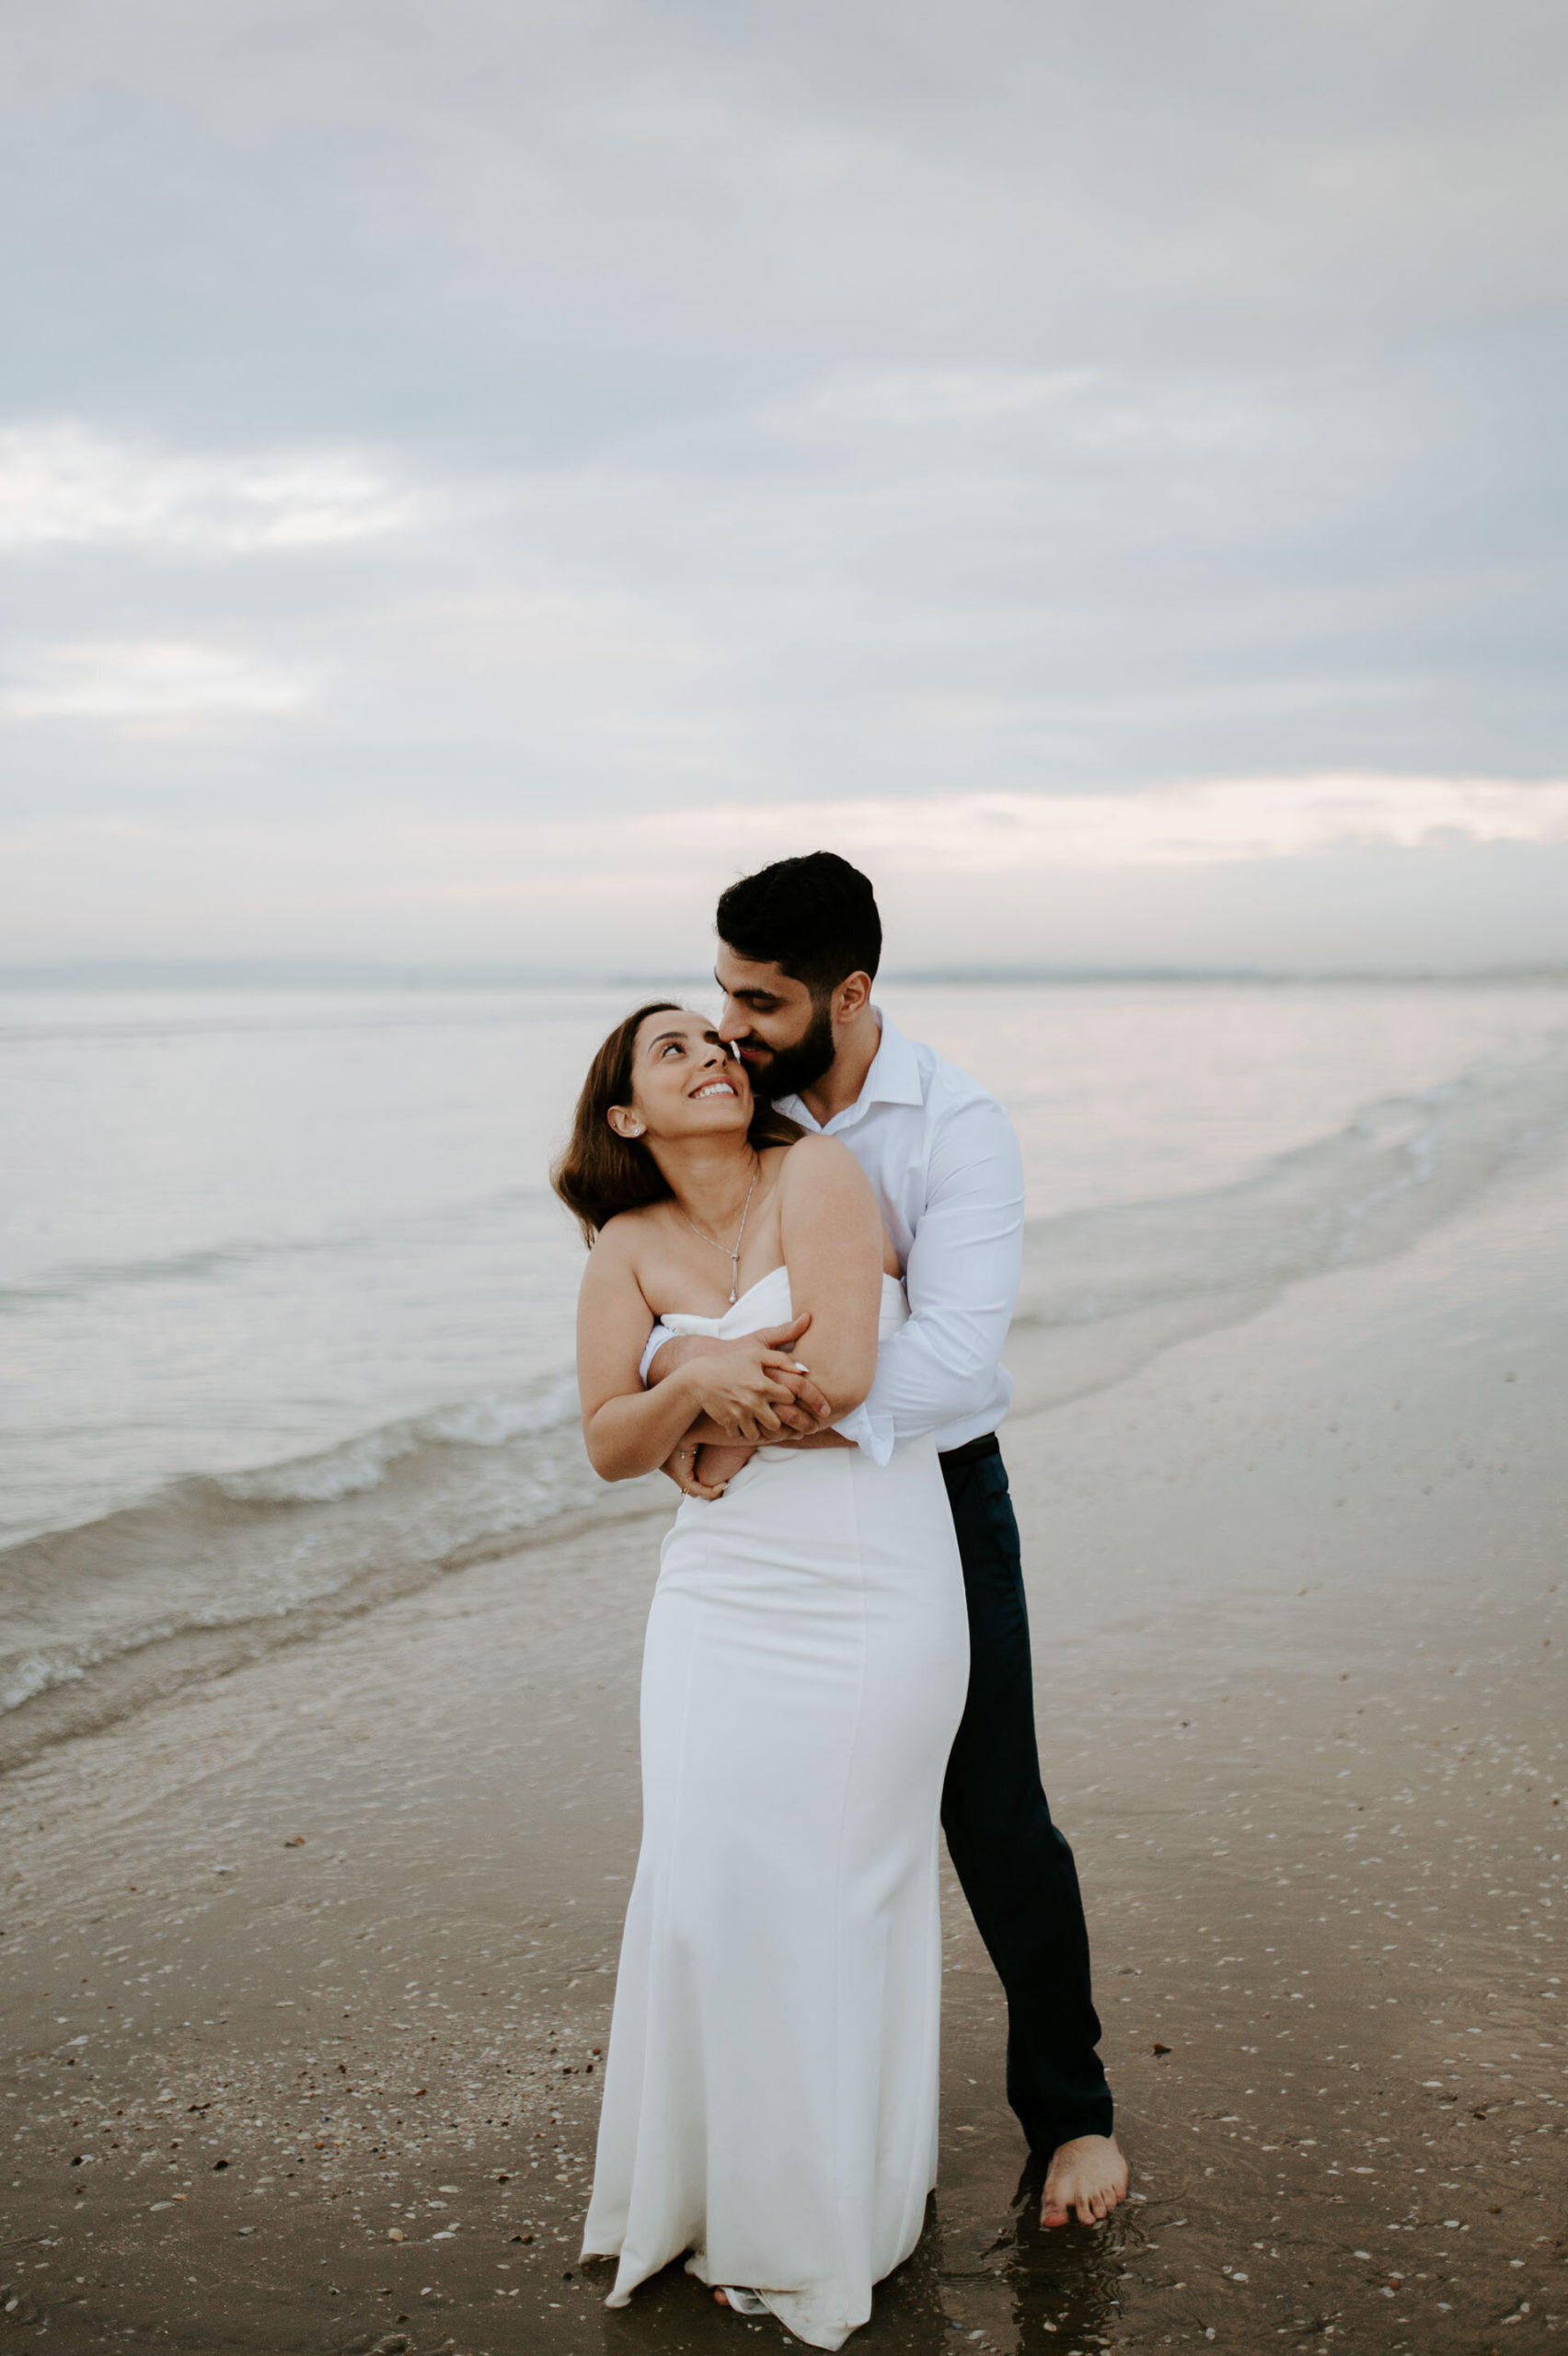 Demiana and Goergeuos - Camber Sands Golden Hour Beach Shoot - Laura Williams Photography-39.jpg